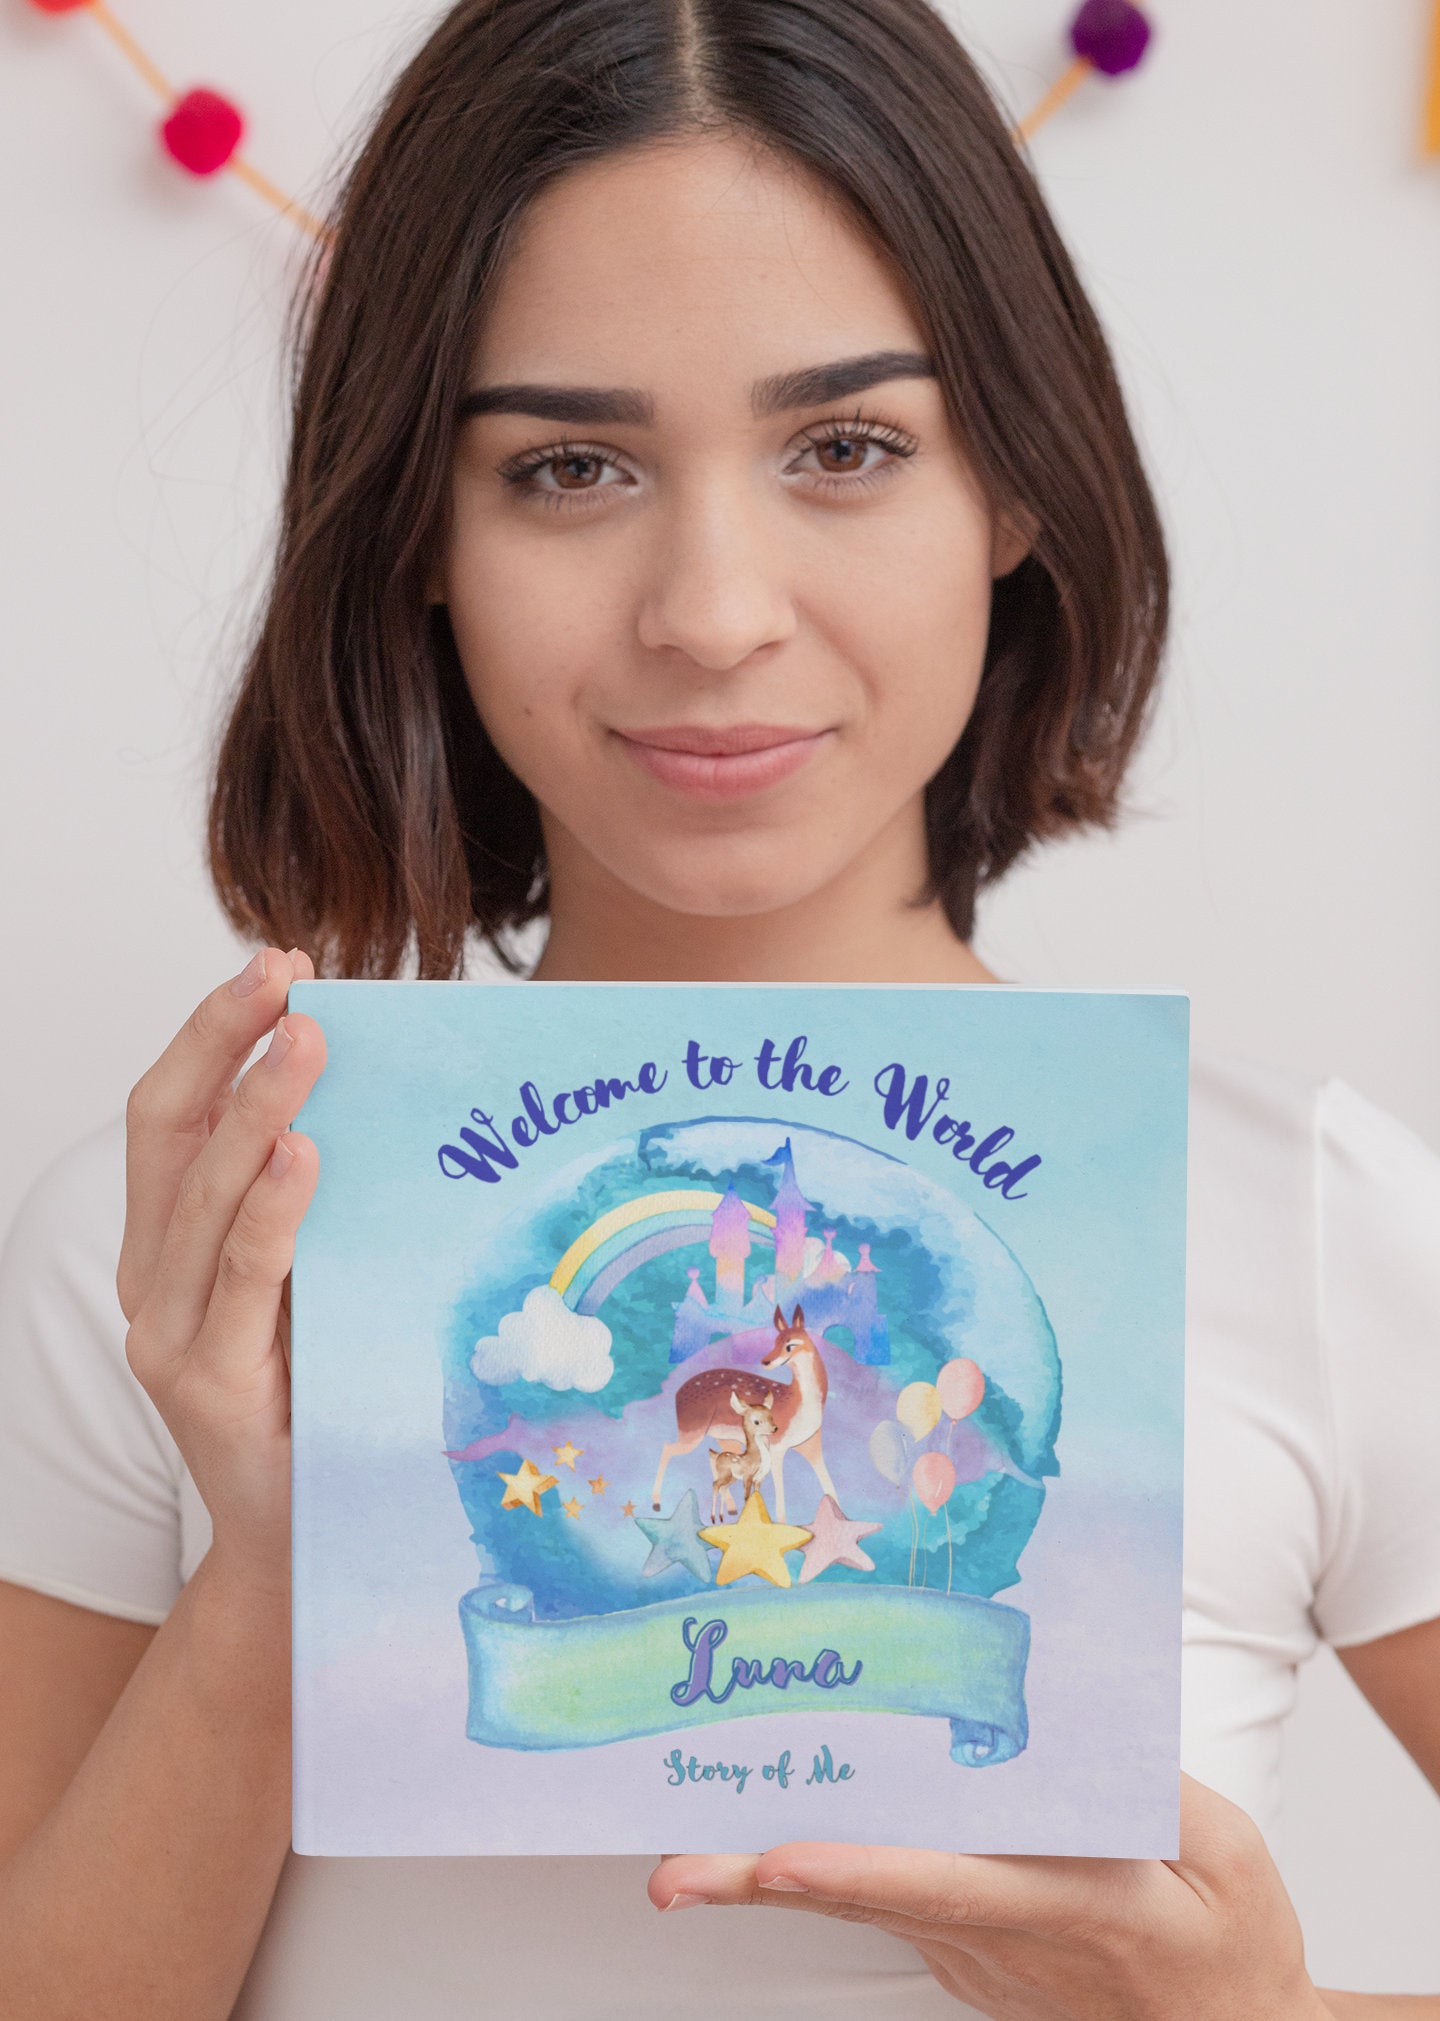 Welcome To The World Custom Baby Book - Baby Rhymes Book Personalized w/child or family name, gift for new babies and parents to be